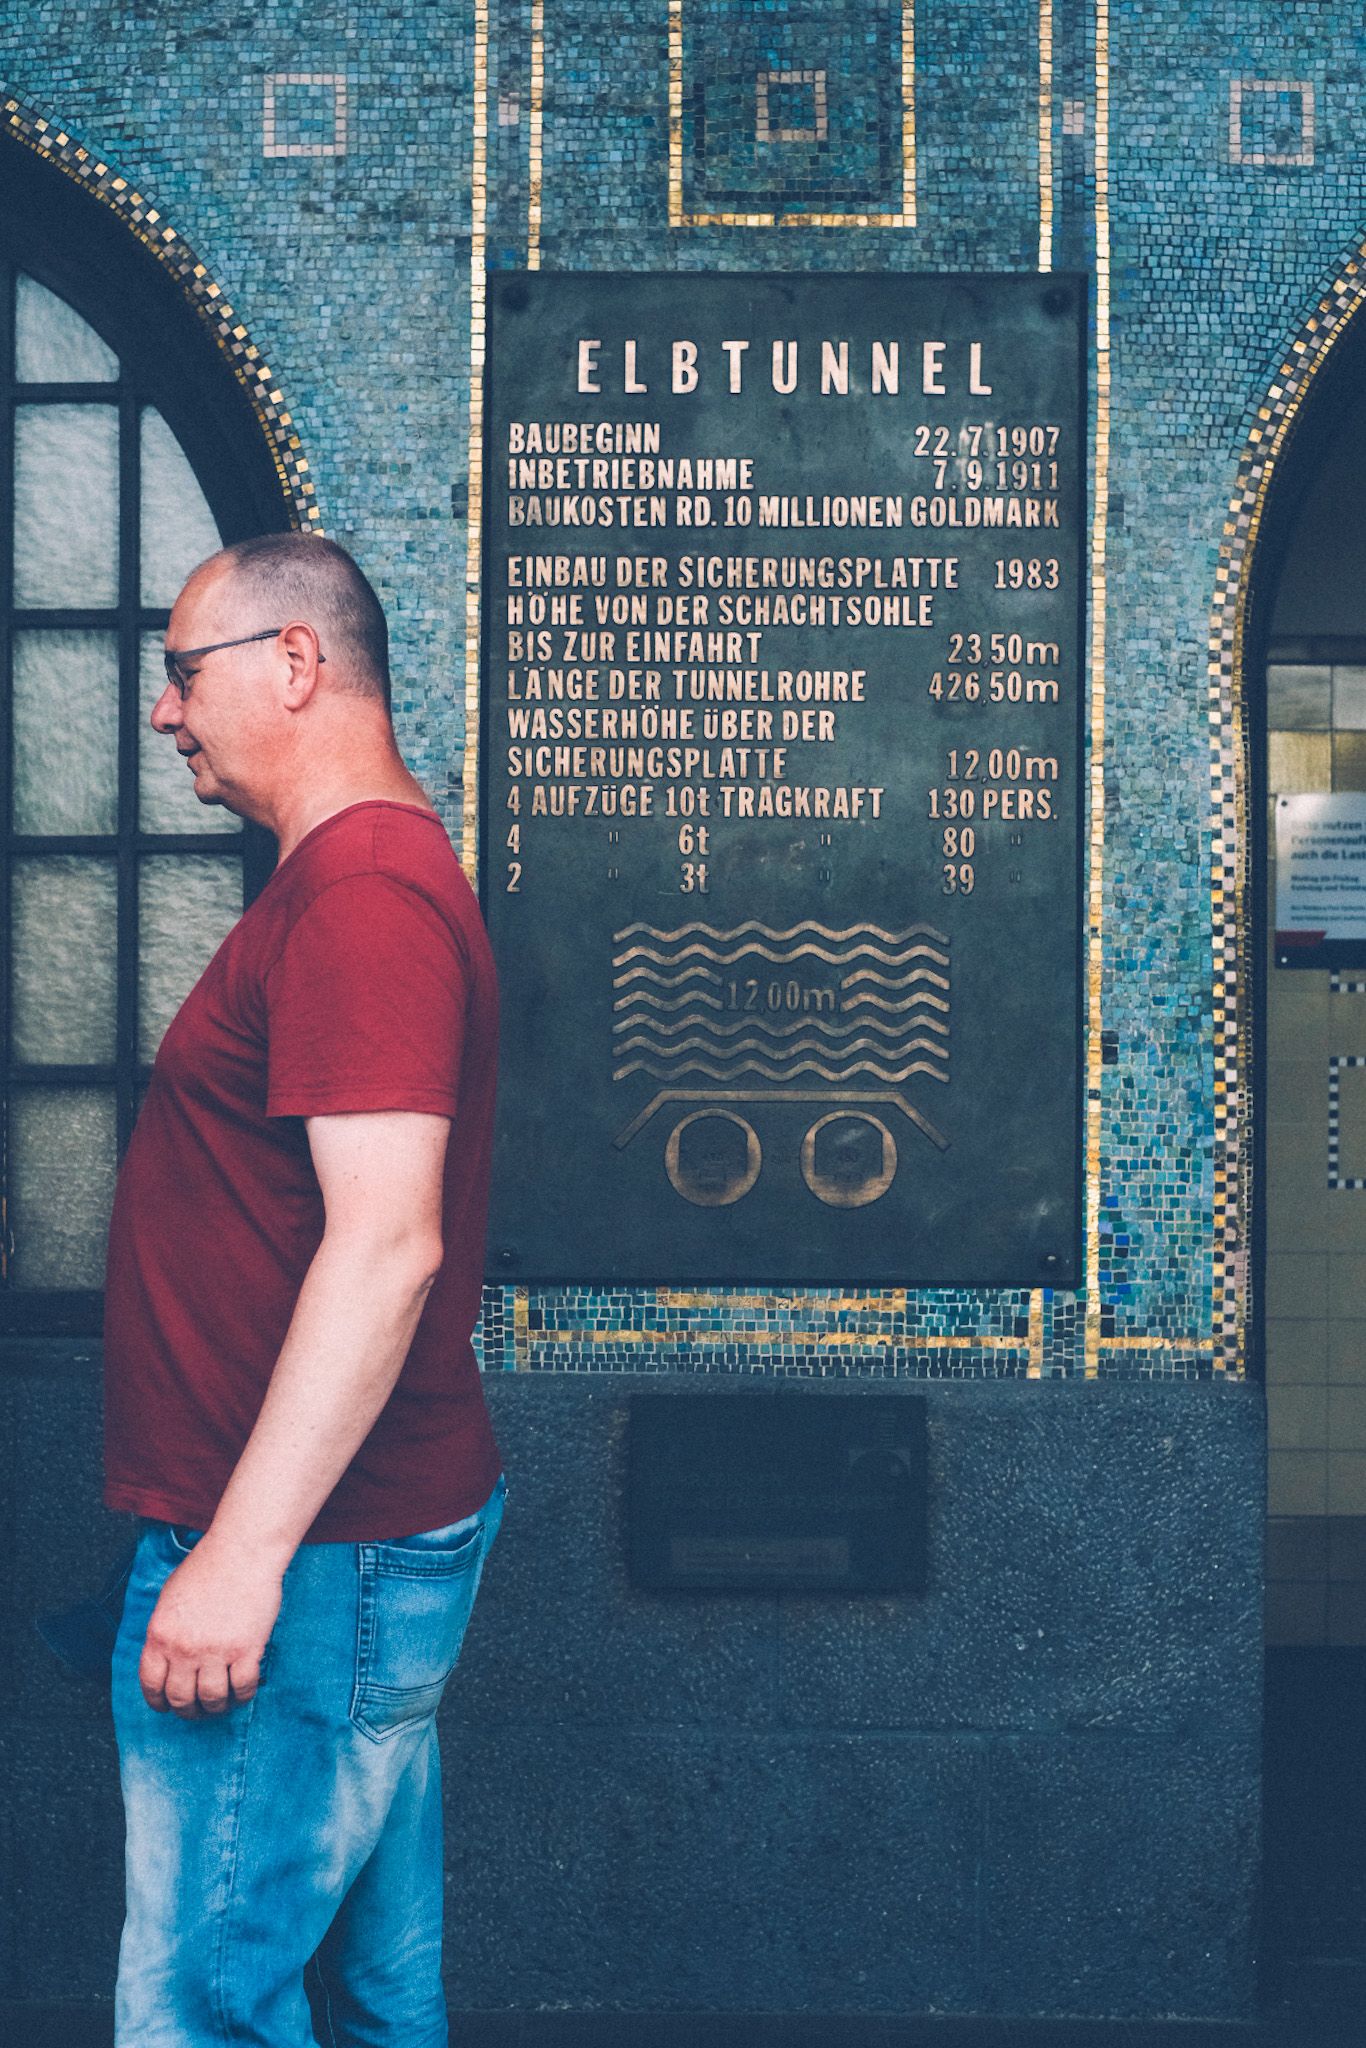 A man in a red shirt stands with his back to a sign saying “Elbtunnel” tiled onto a wall in Hamburg, Germany.